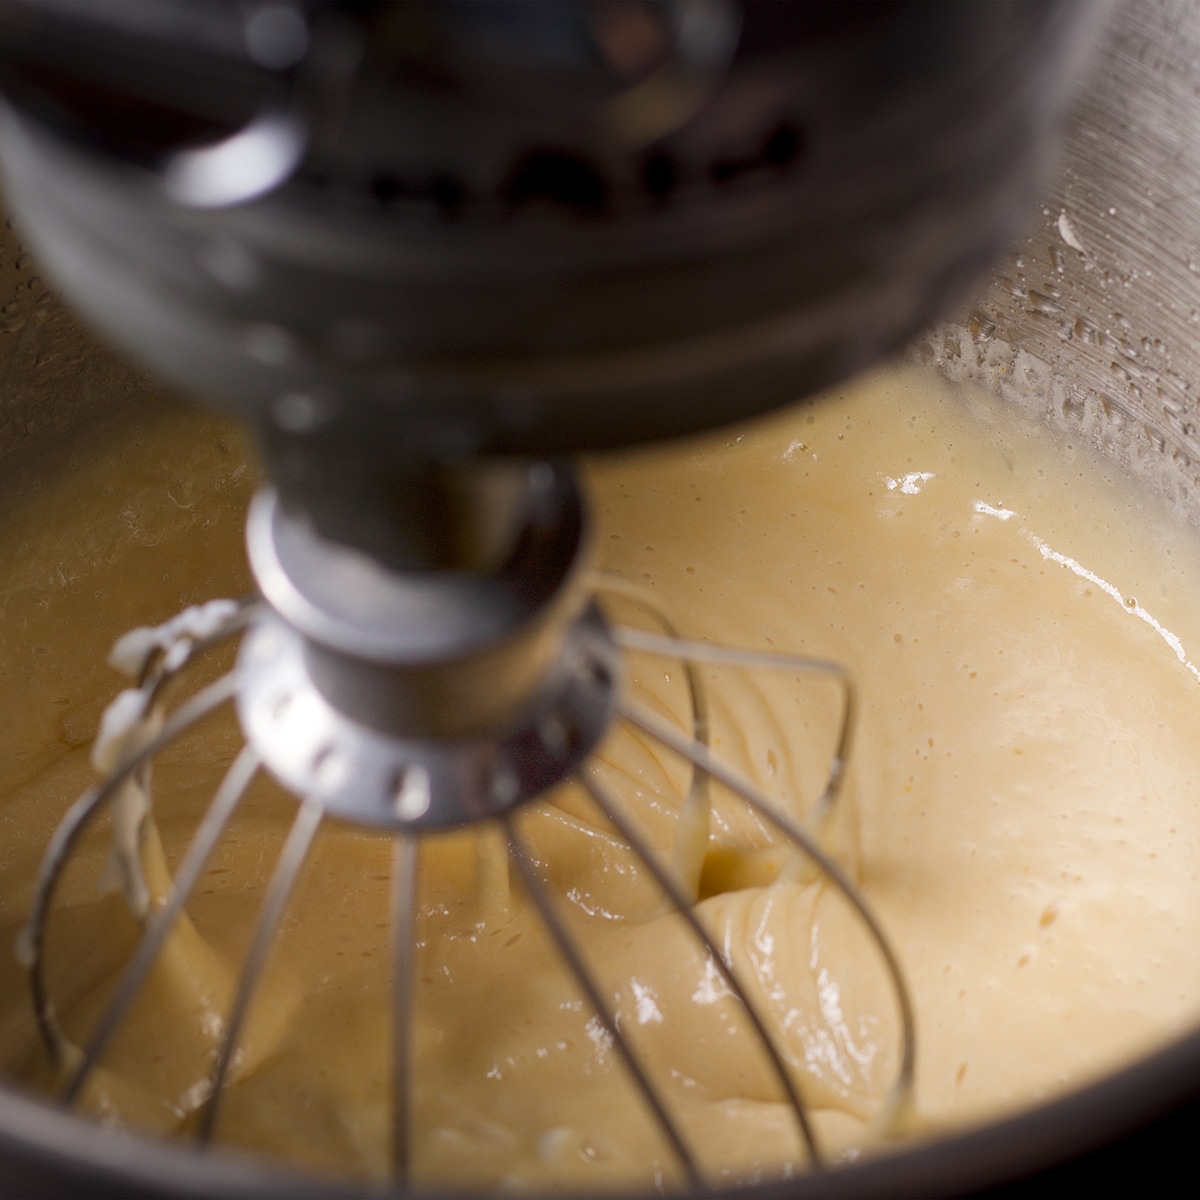 Mixing yogurt and vanilla into the loaf cake batter.